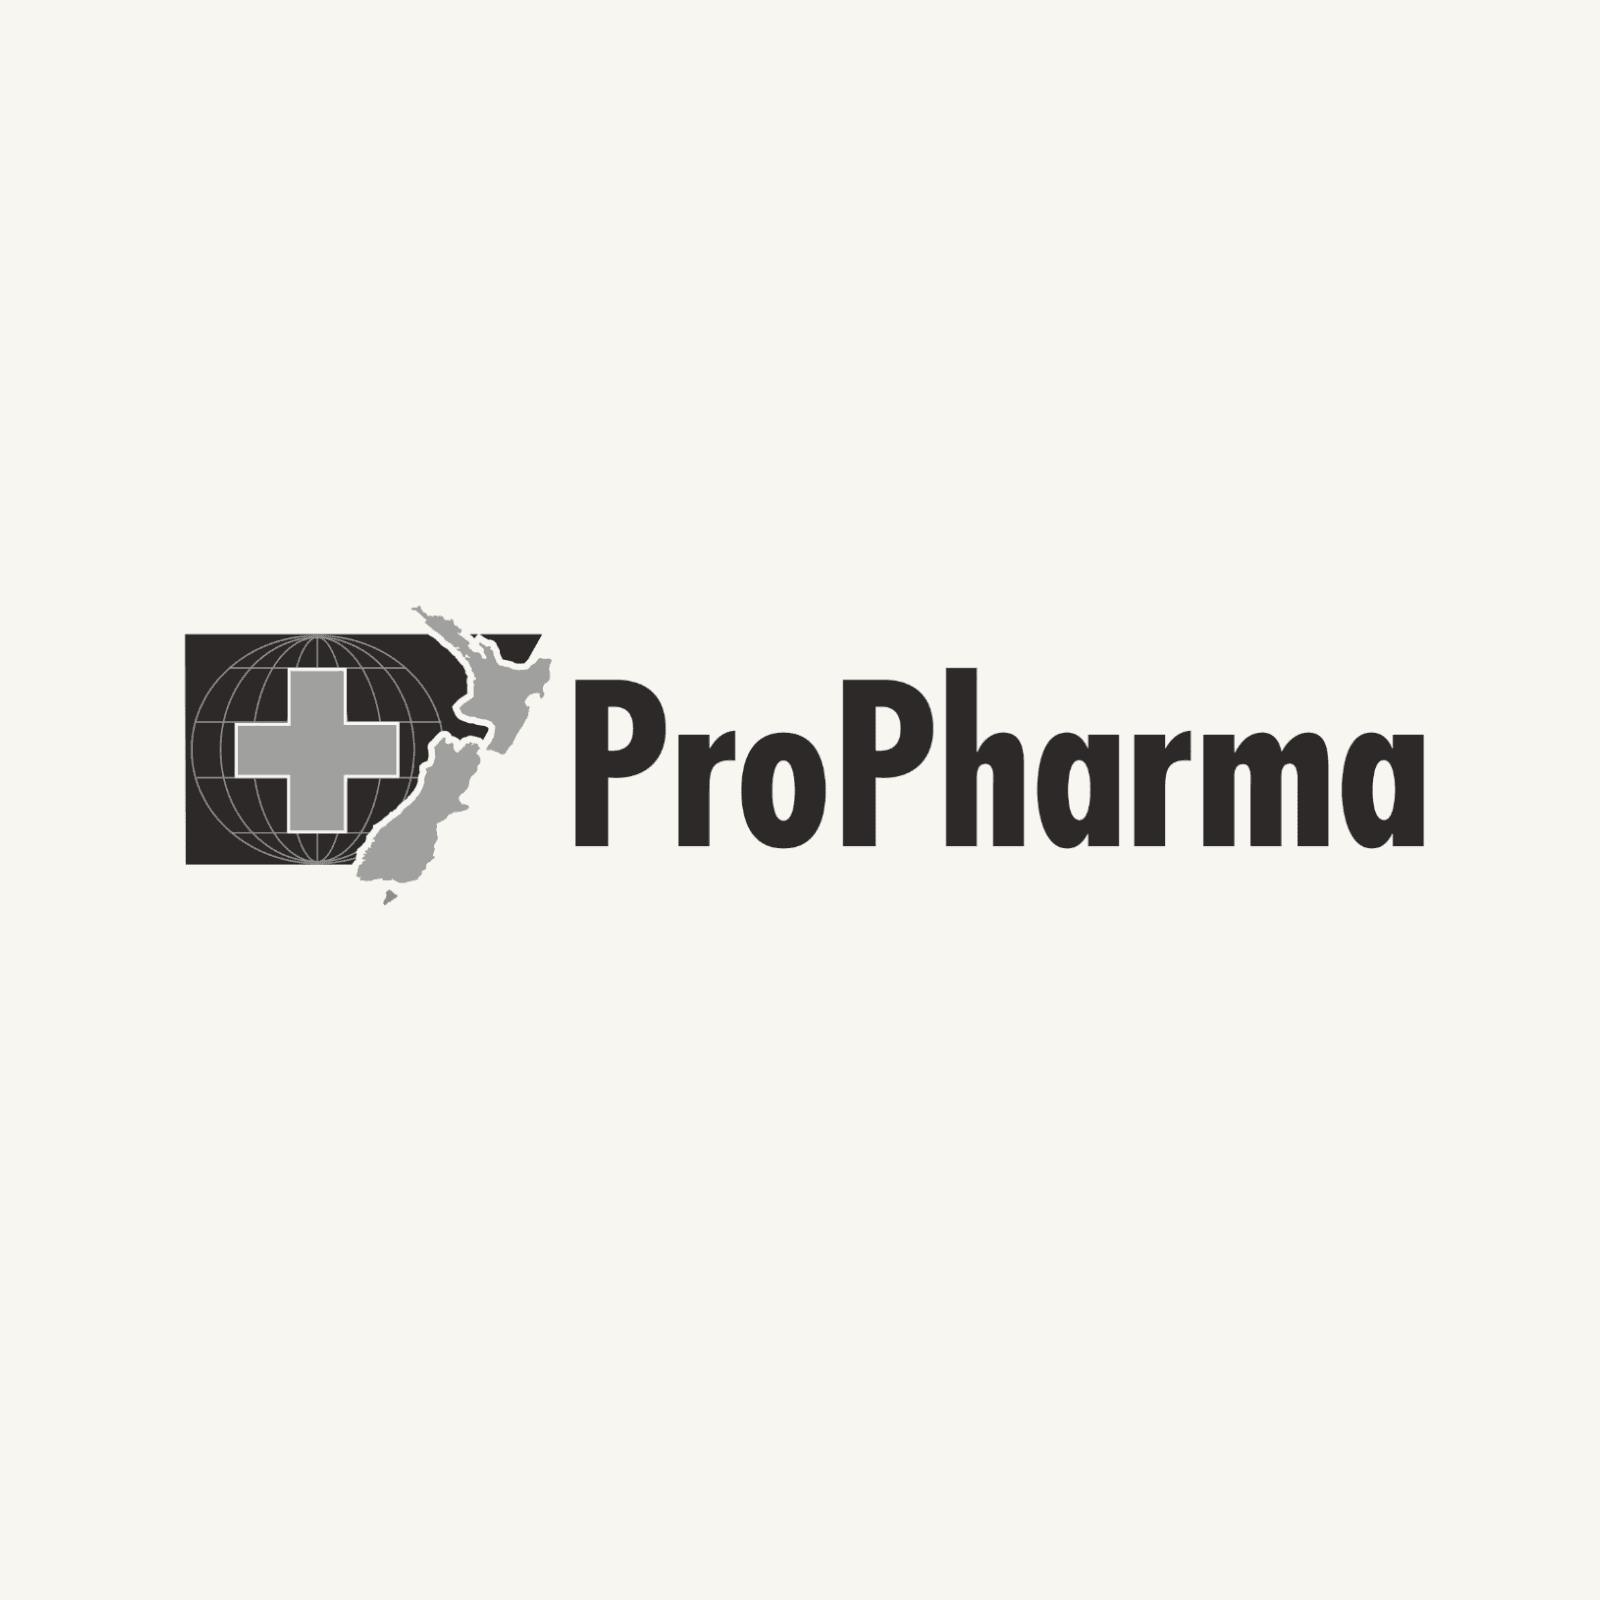 Summer Wang appointed as Tactical Planner at ProPharma